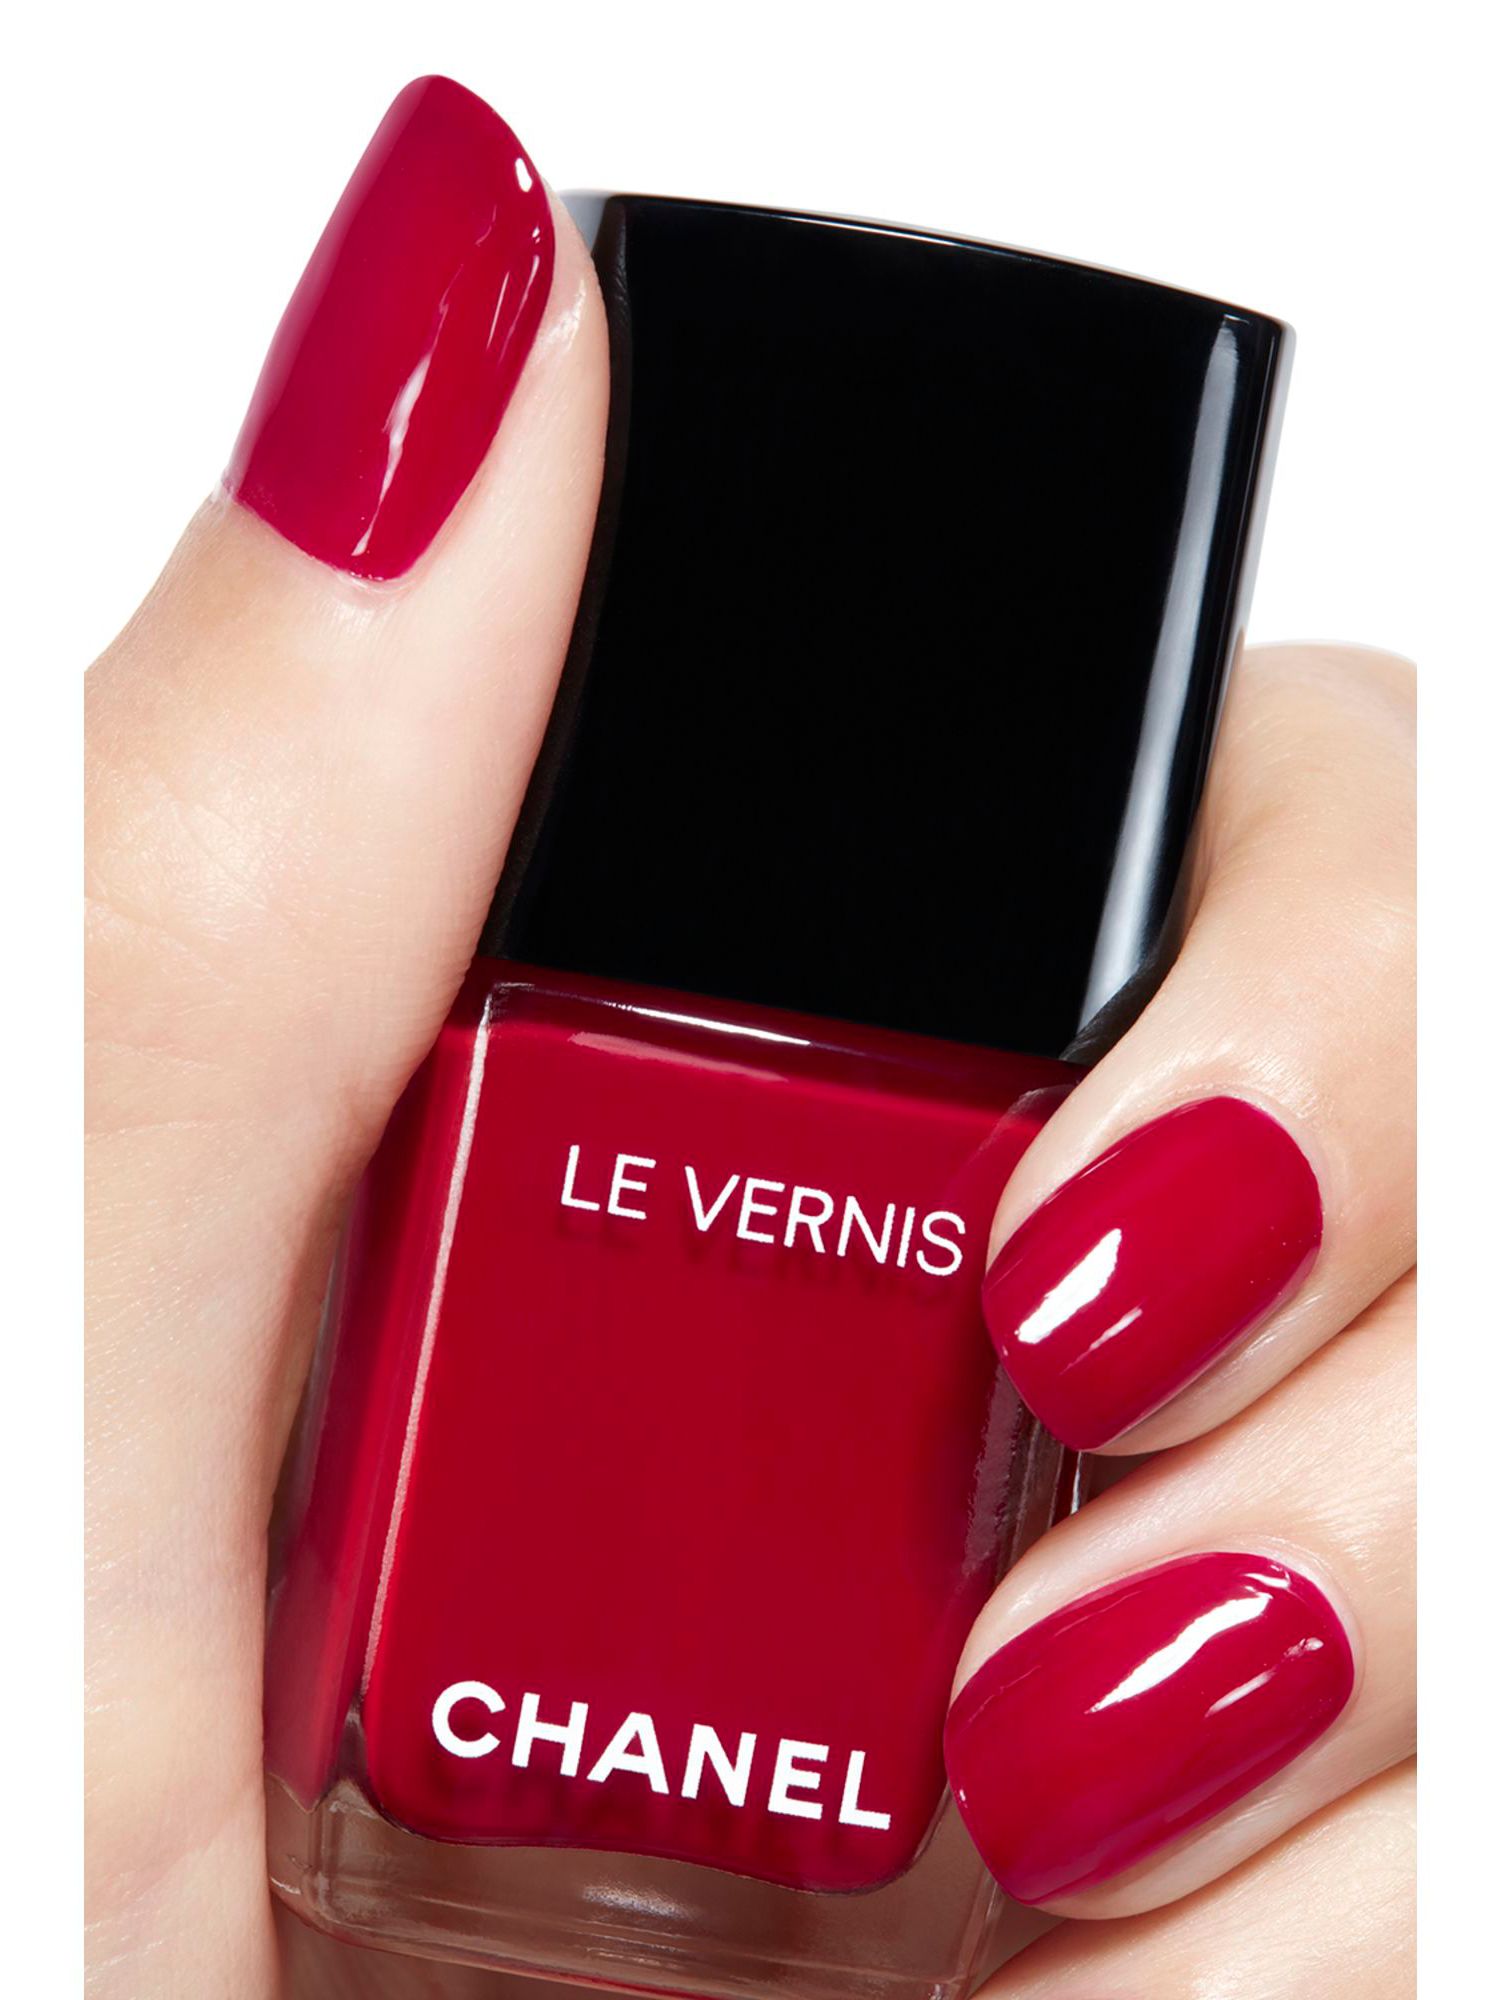 CHANEL Vernis Colour, 151 Pirate at John Lewis & Partners